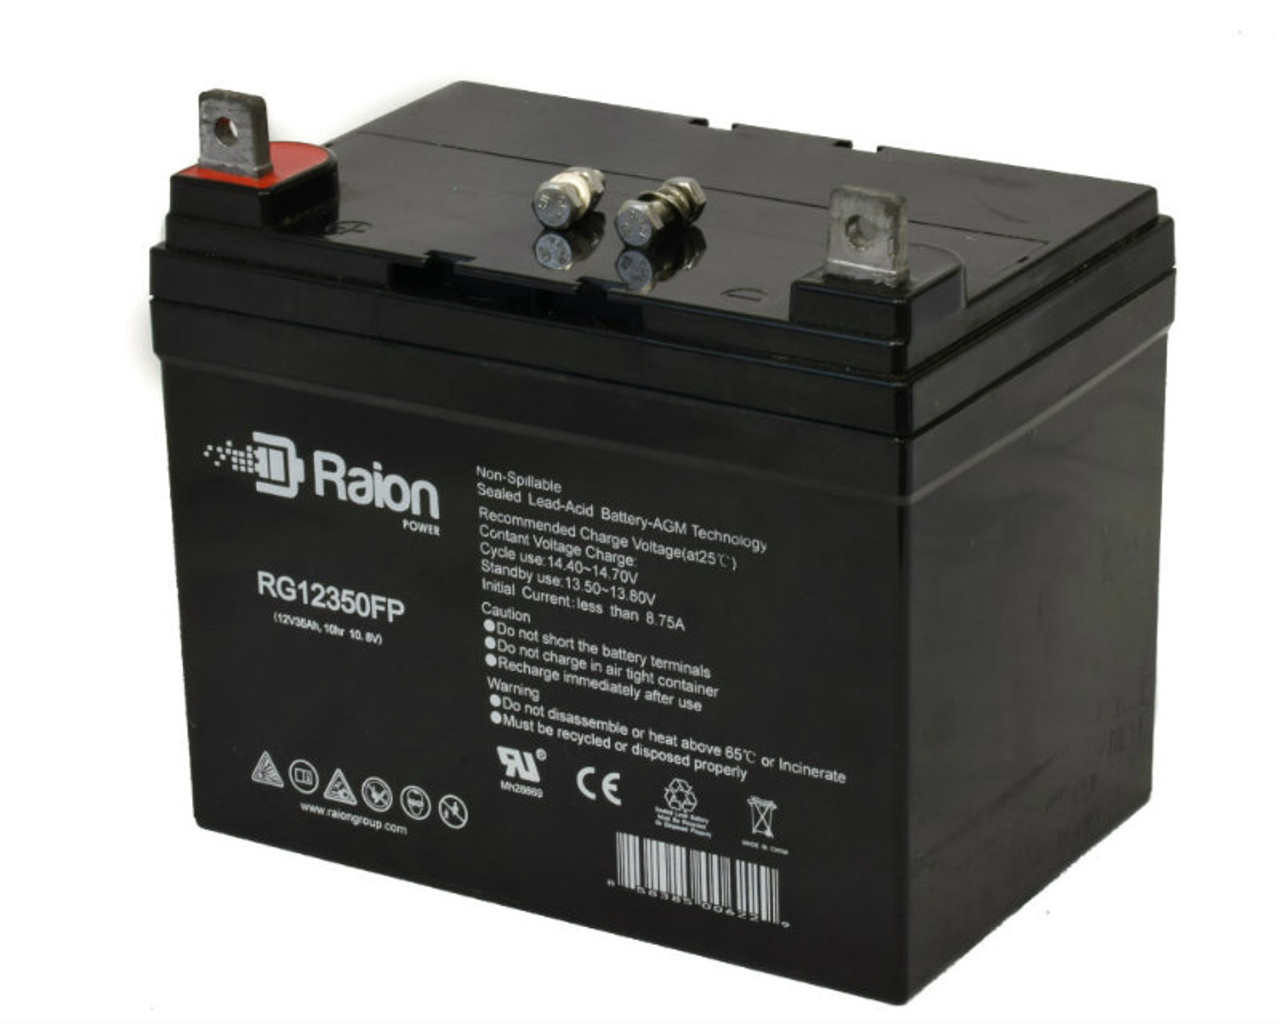 Raion Power Replacement 12V 35Ah Battery for National Power GT160S5 - 1 Pack